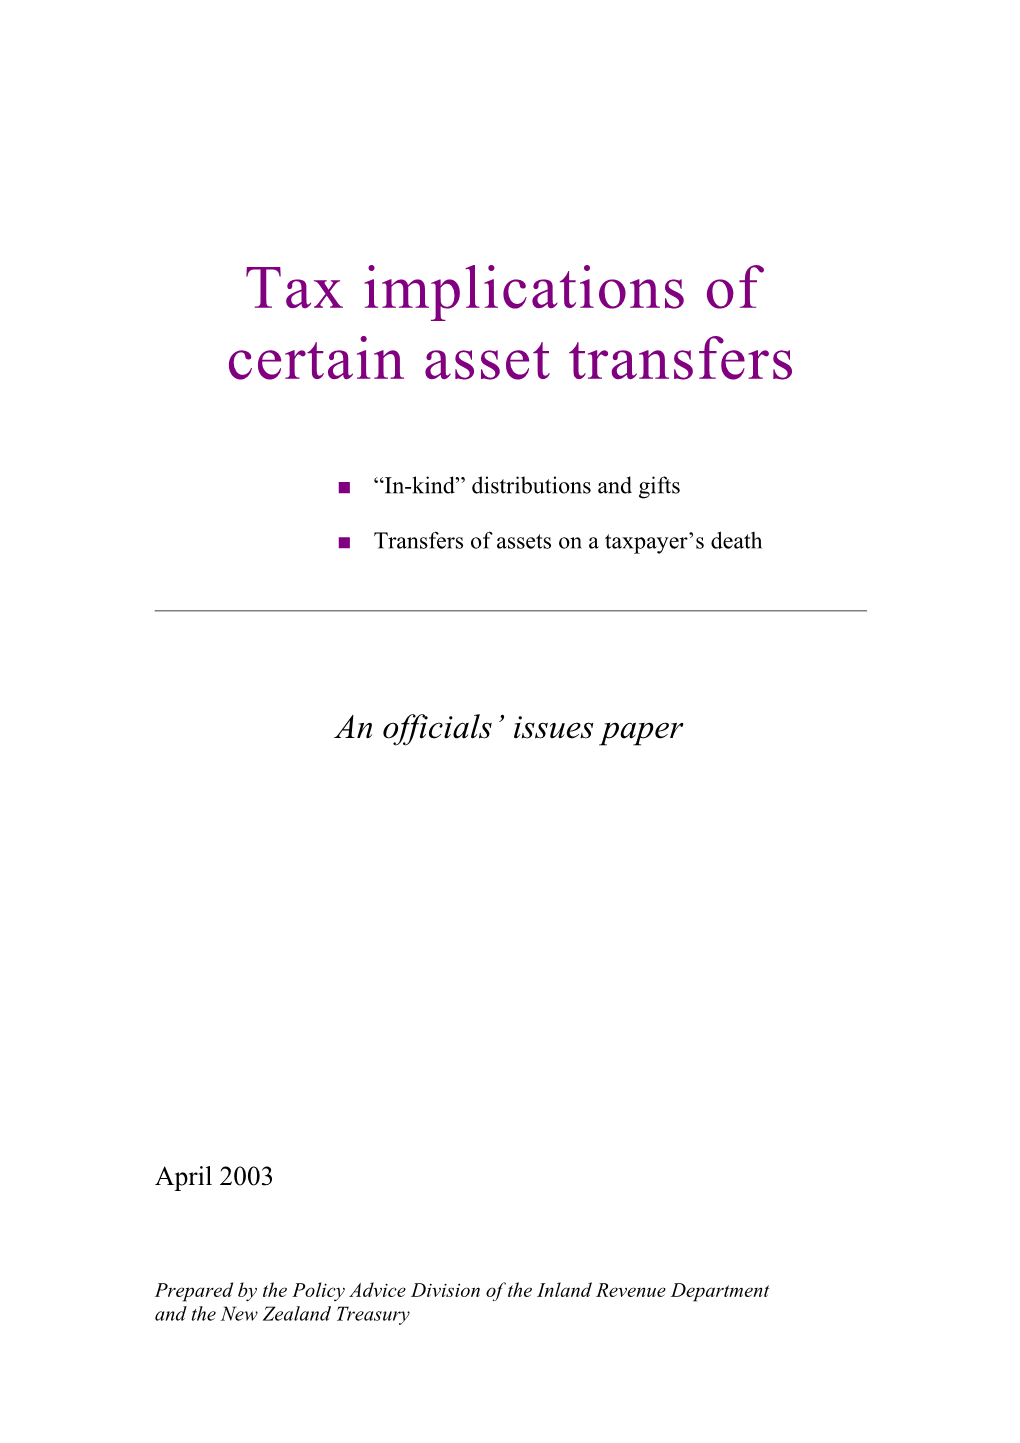 Tax Implications of Certain Asset Transfers - an Officials' Issues Paper